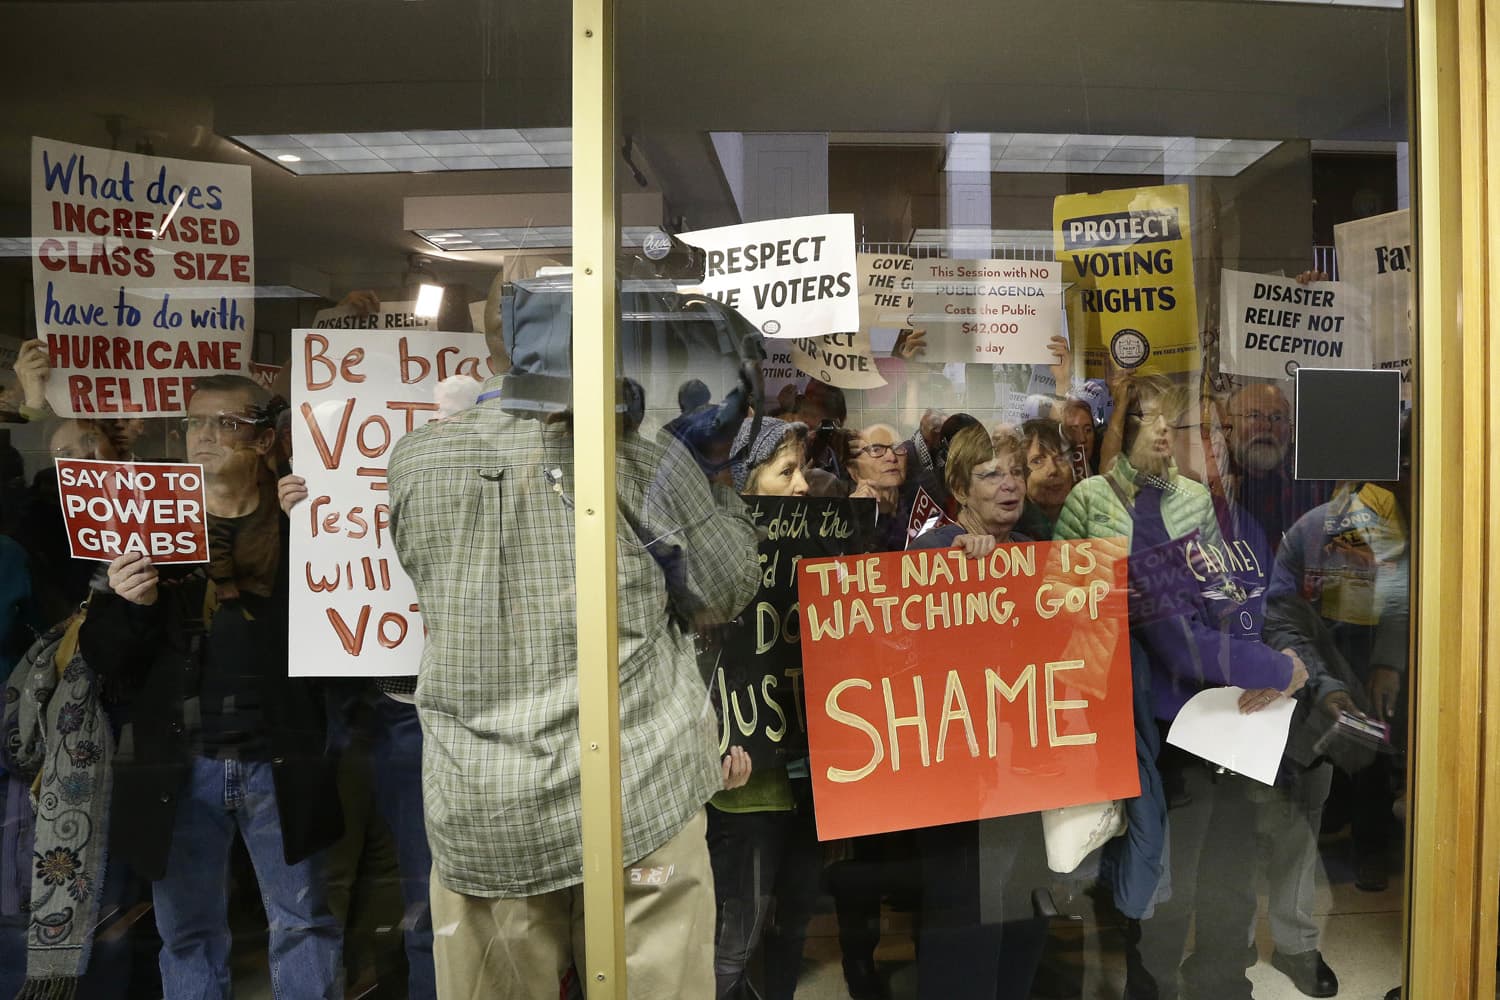 Protestors gather outside of a press conference room during a special session at the North Carolina Legislature in Raleigh, N.C., Thursday, Dec. 15, 2016. (Gerry Broome/AP)